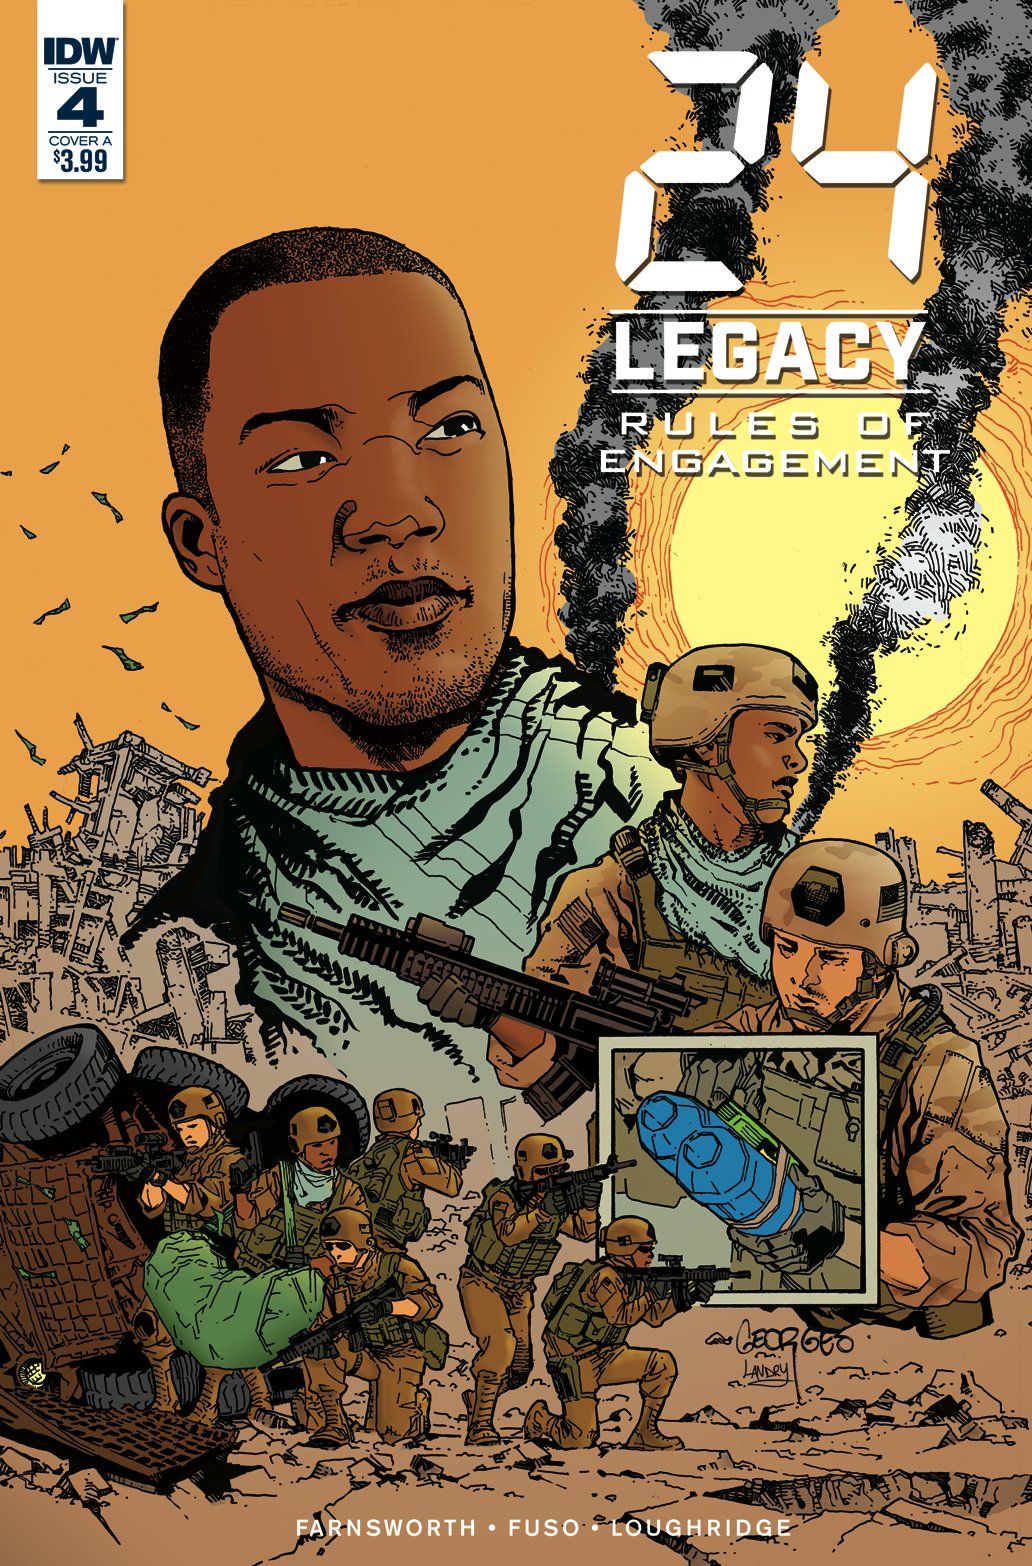 24 LEGACY RULES OF ENGAGEMENT #4 (OF 5) CVR A JEANTY COVER